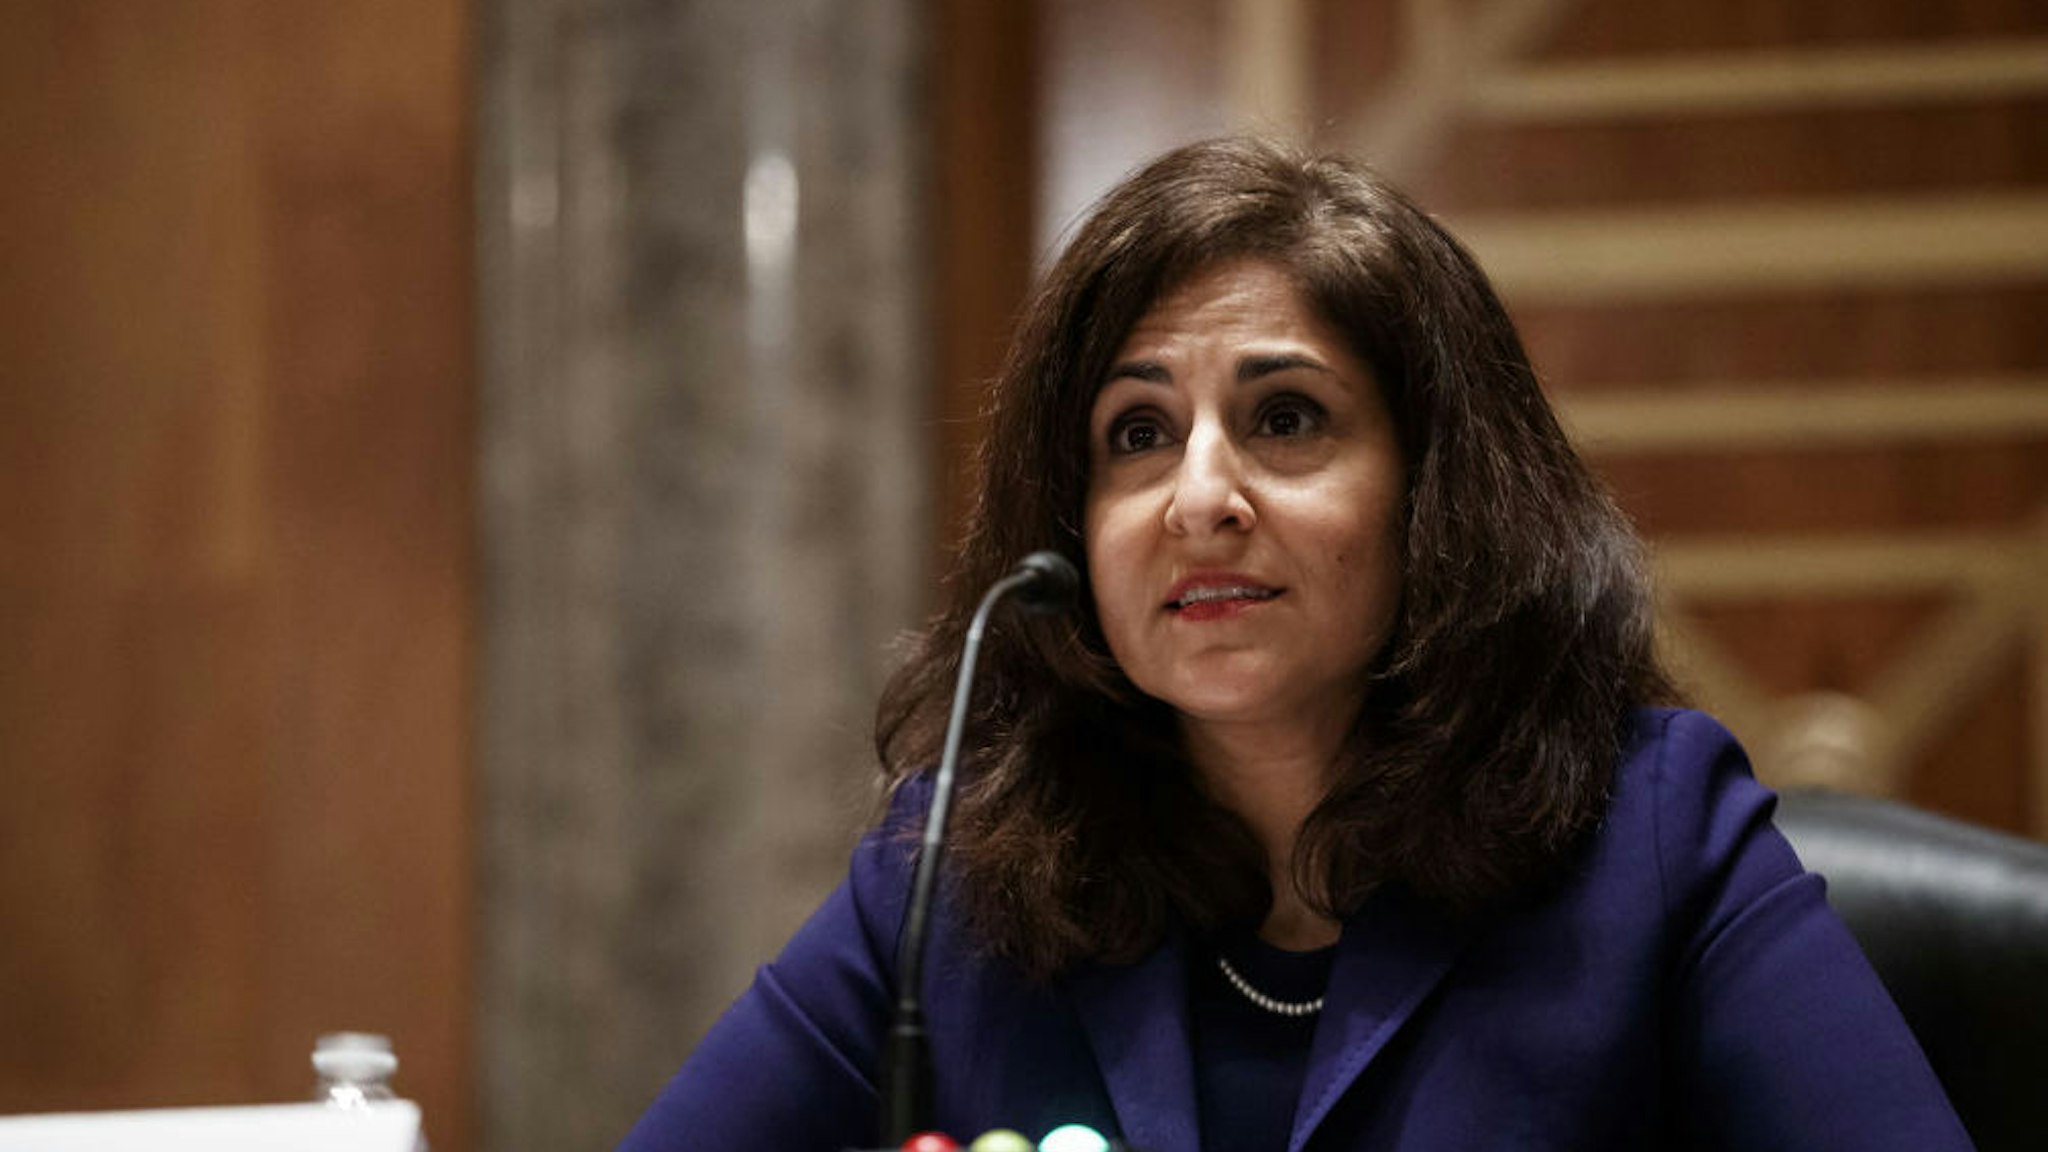 Neera Tanden, director of the Office and Management and Budget (OMB) nominee for U.S. President Joe Biden, speaks during a Senate Homeland Security and Governmental Affairs Committee confirmation hearing in Washington, D.C., U.S., on Tuesday, Feb. 9, 2021. Tanden, who pledged to work with both parties after drawing sharp criticism from Republicans for sniping at them on social media, worked on the Affordable Care Act during the Obama years and was an aide to Hillary Clinton from her time as first lady.